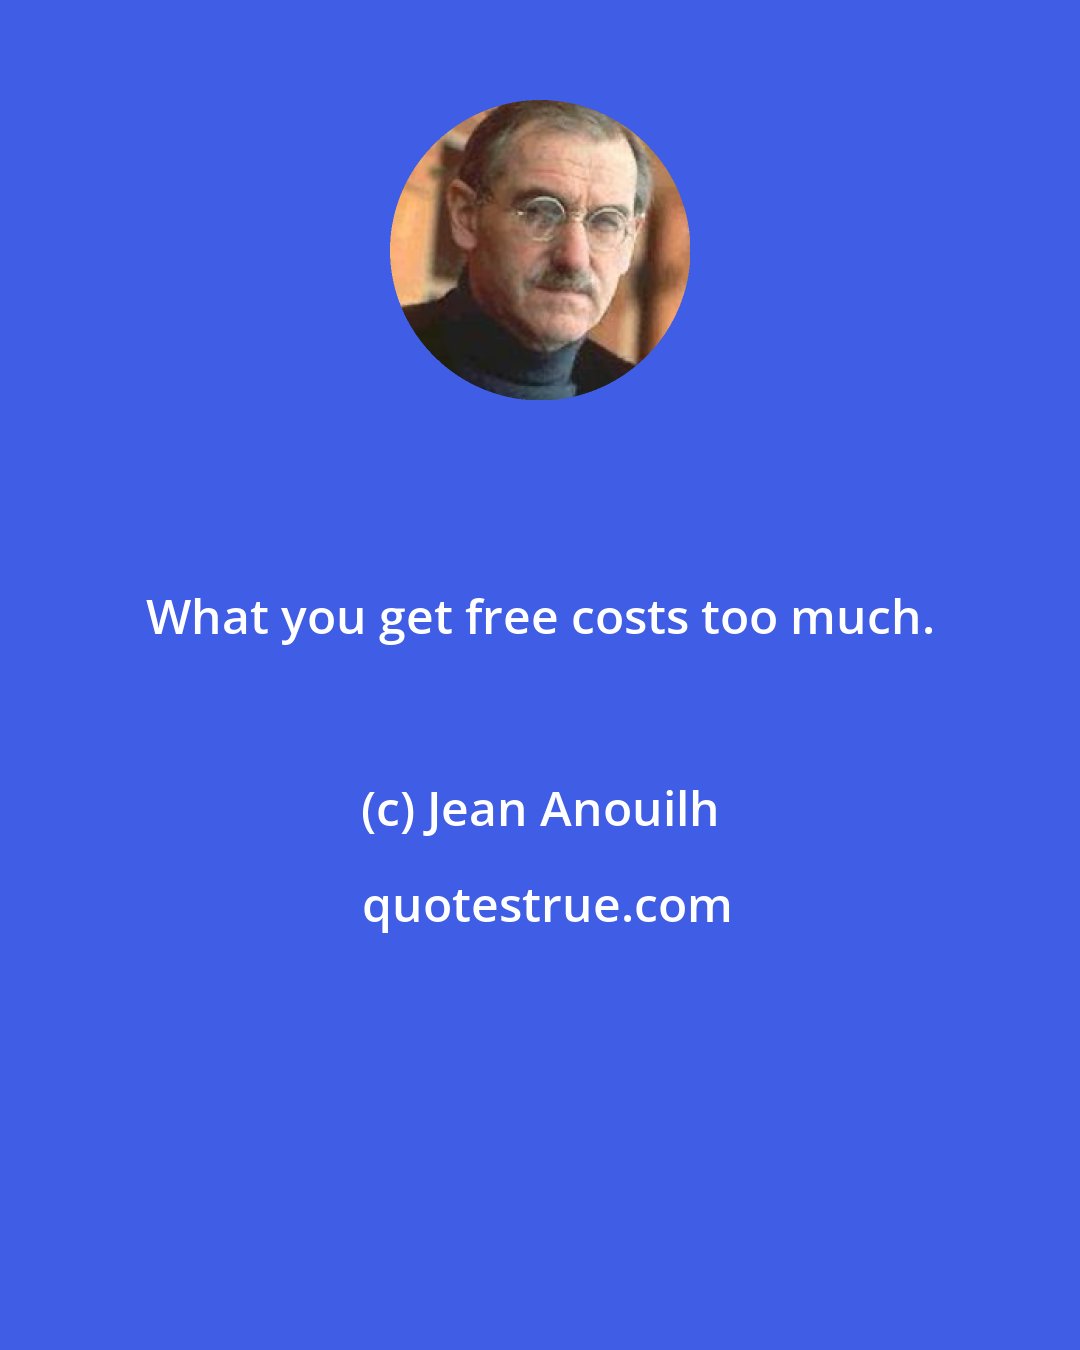 Jean Anouilh: What you get free costs too much.